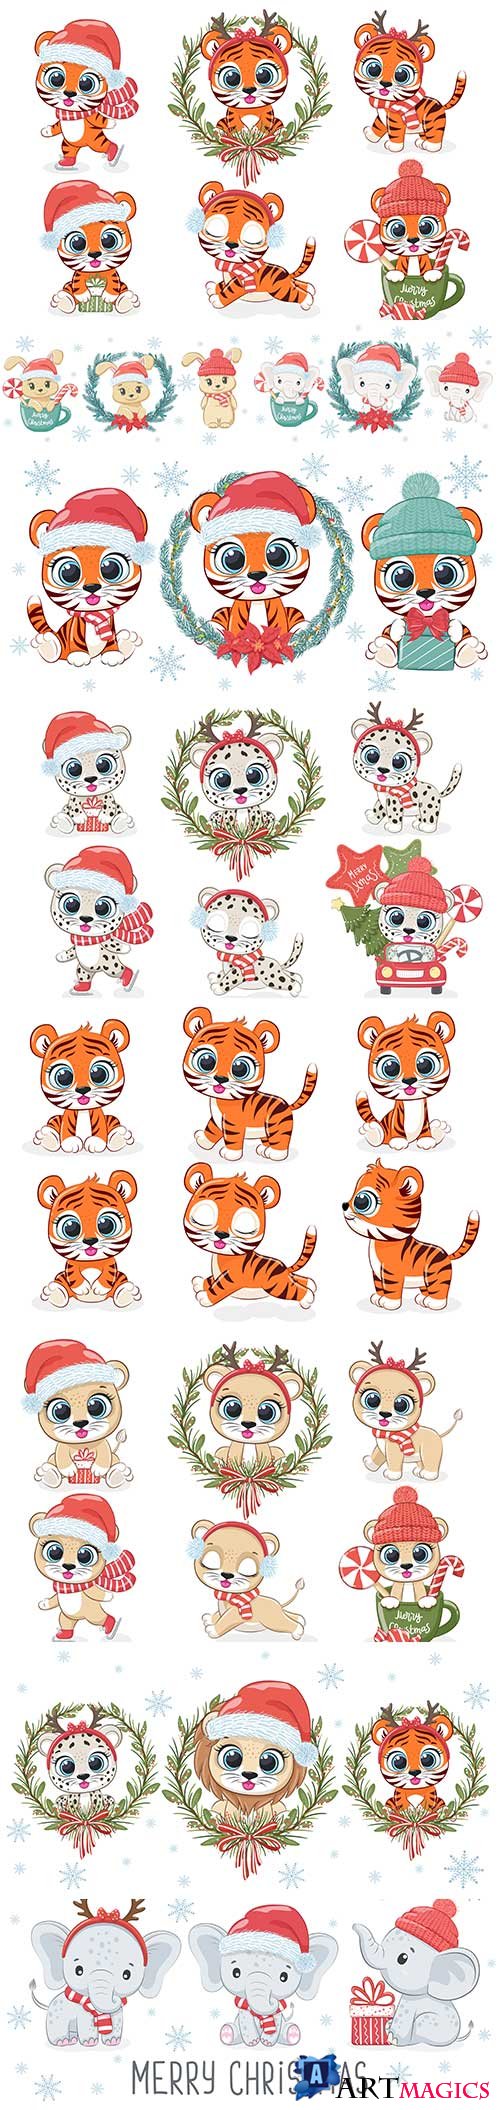 Cute animals for the new year and christmas vector illustrations